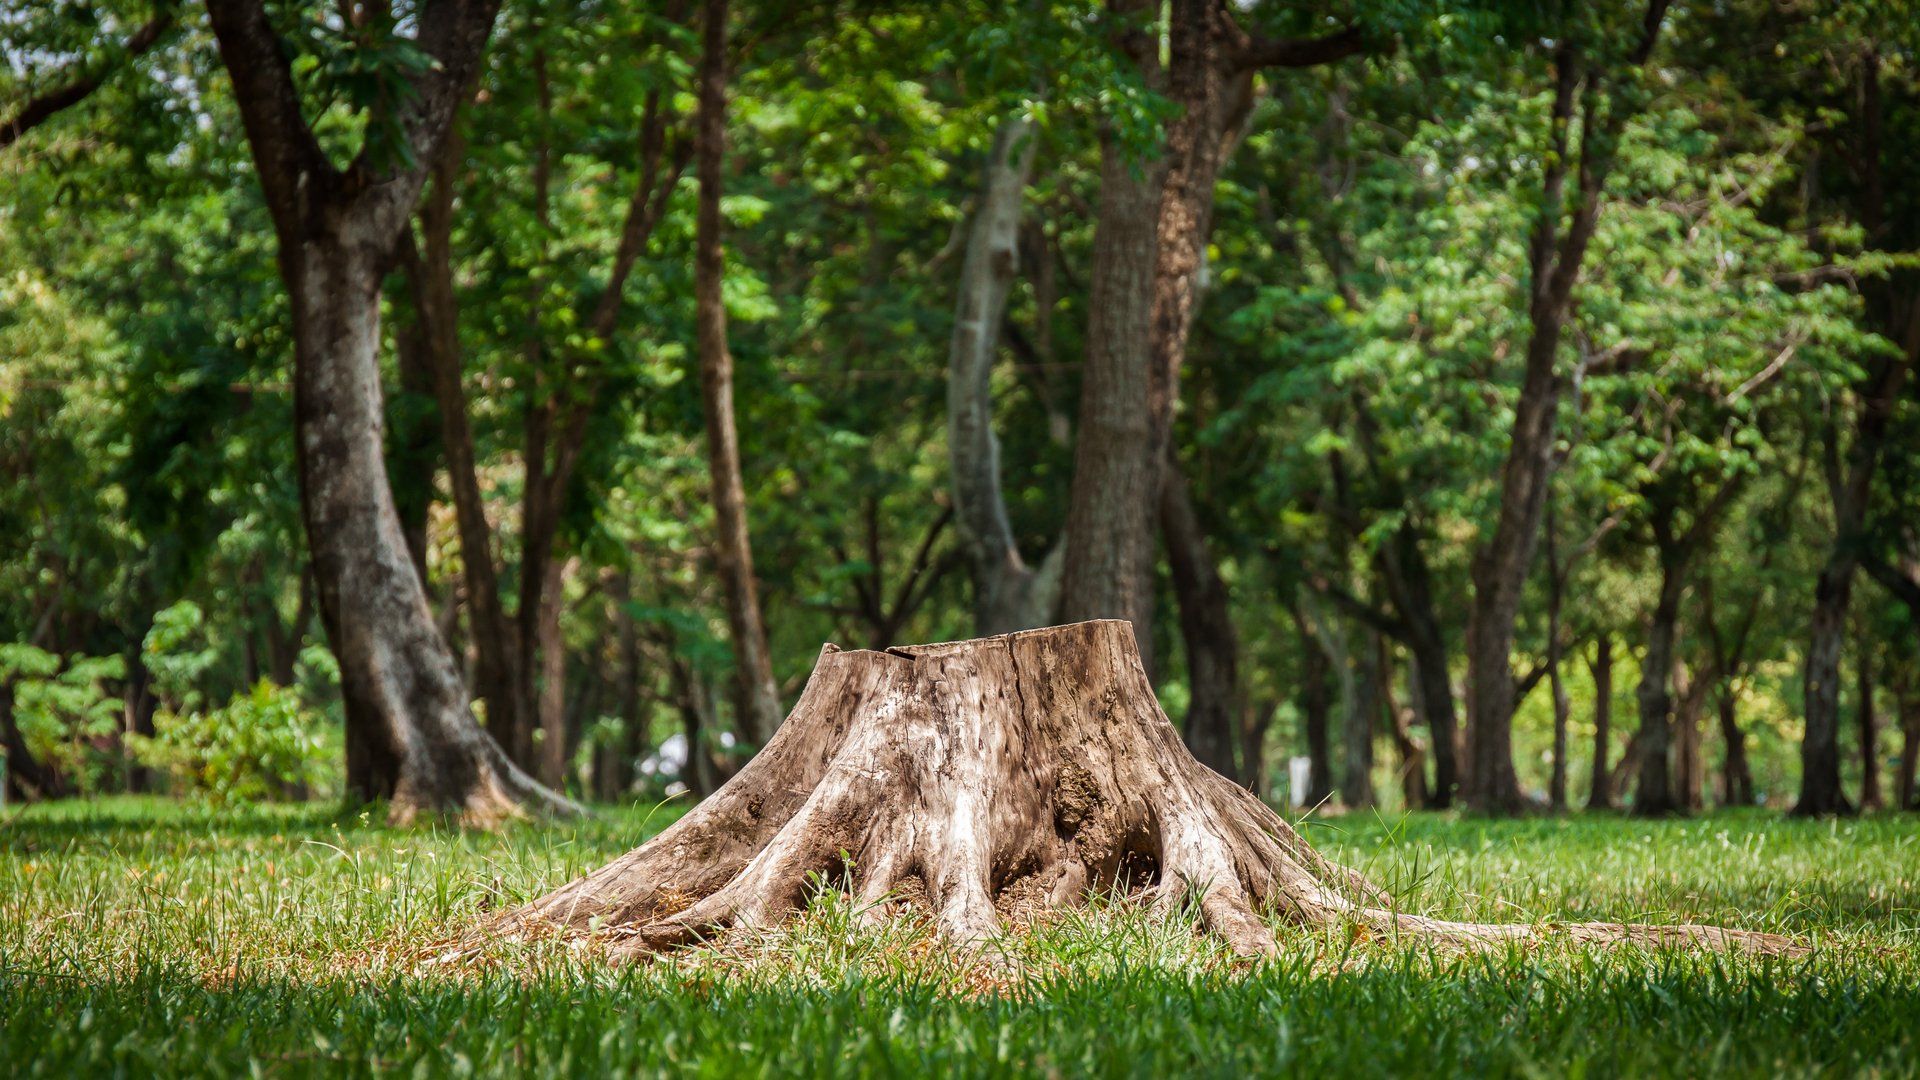 Stump and Tree Removal in Columbia, SC | Top Cut Tree Service, LLC